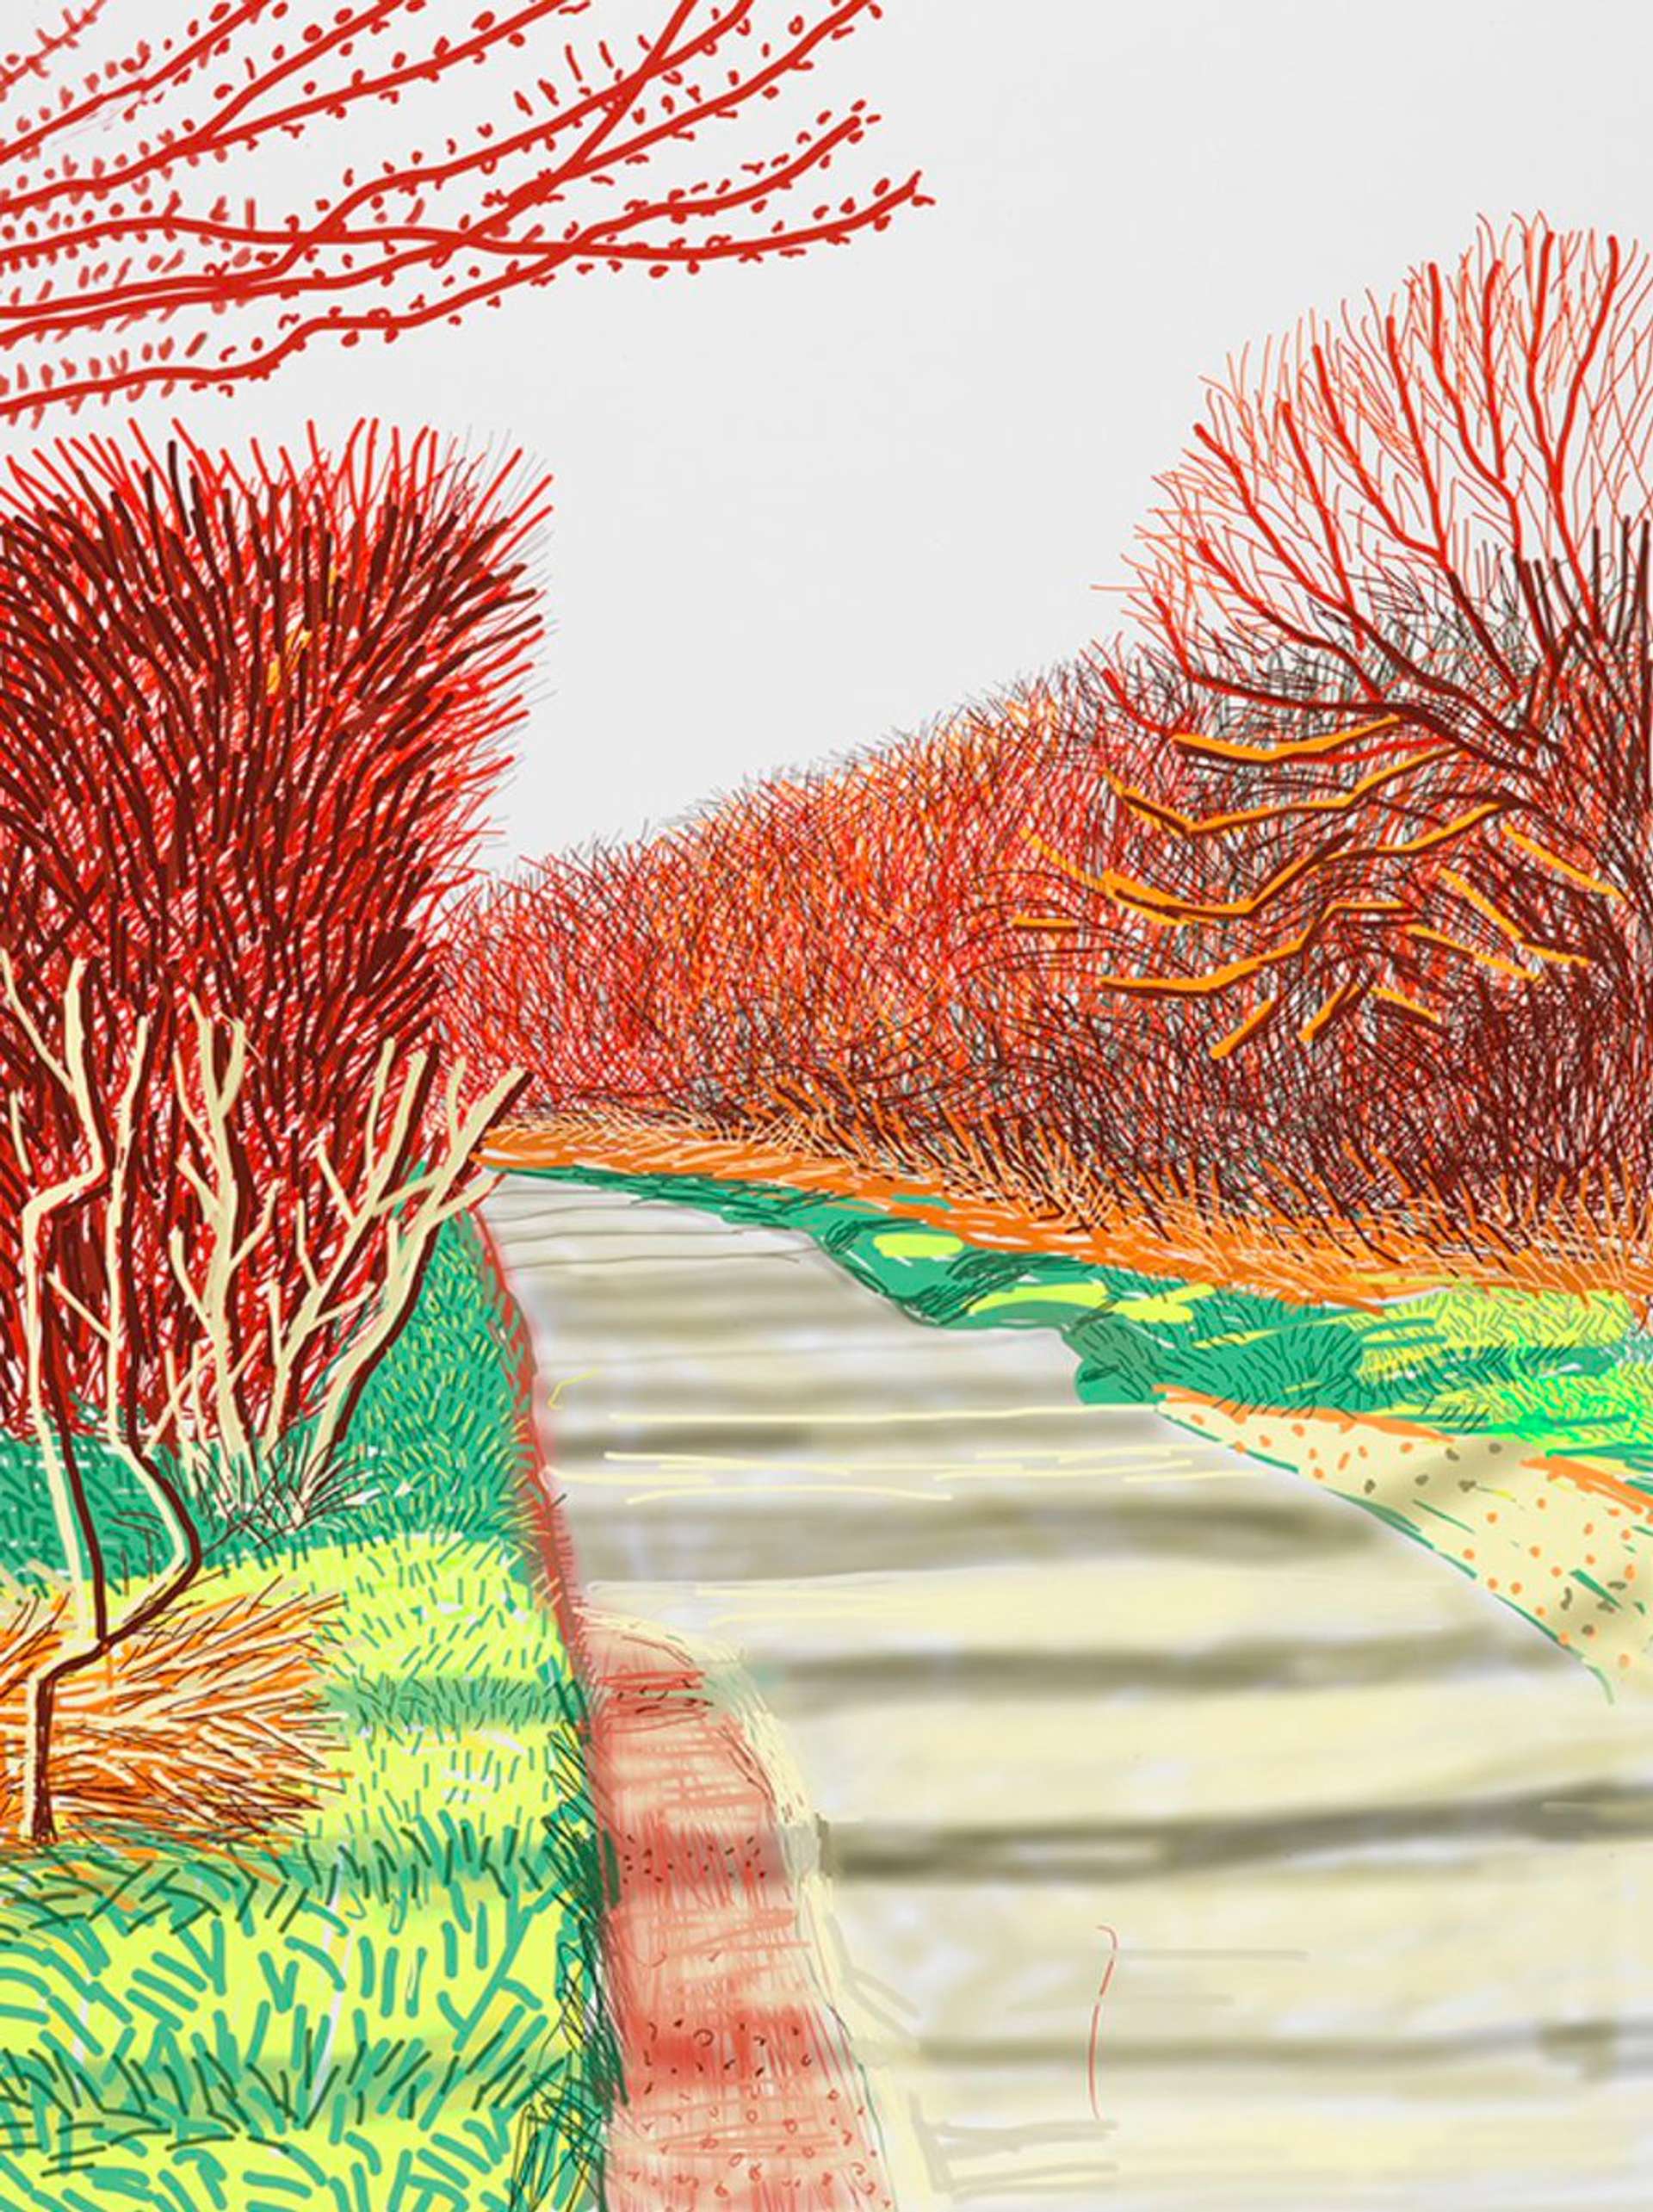 An autumnal landscape by David Hockney, showing orange tree trunks on either side of a path.